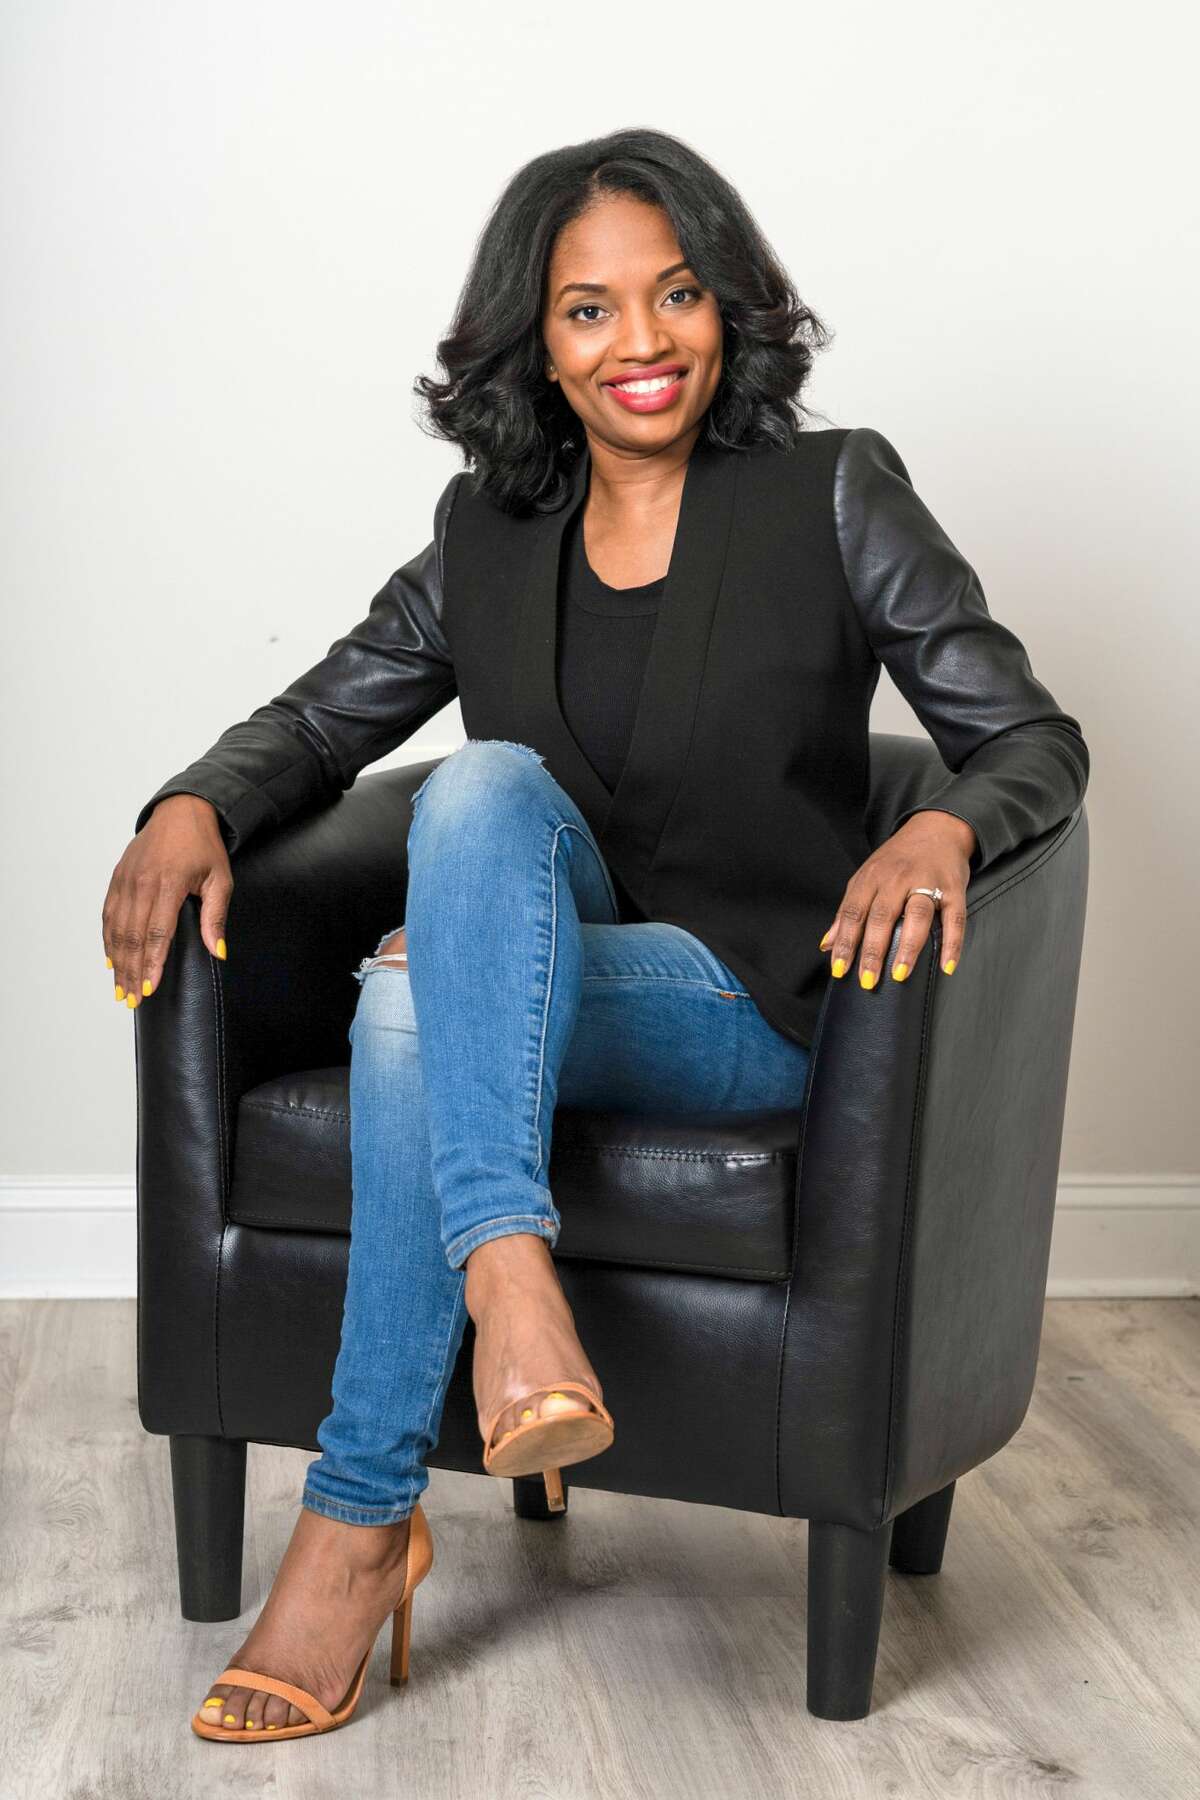 Nathaalie M. Carey, Women@Work executive board member and magazine columnist. She is senior vice president, industry affairs and social responsibility at NAREIT.